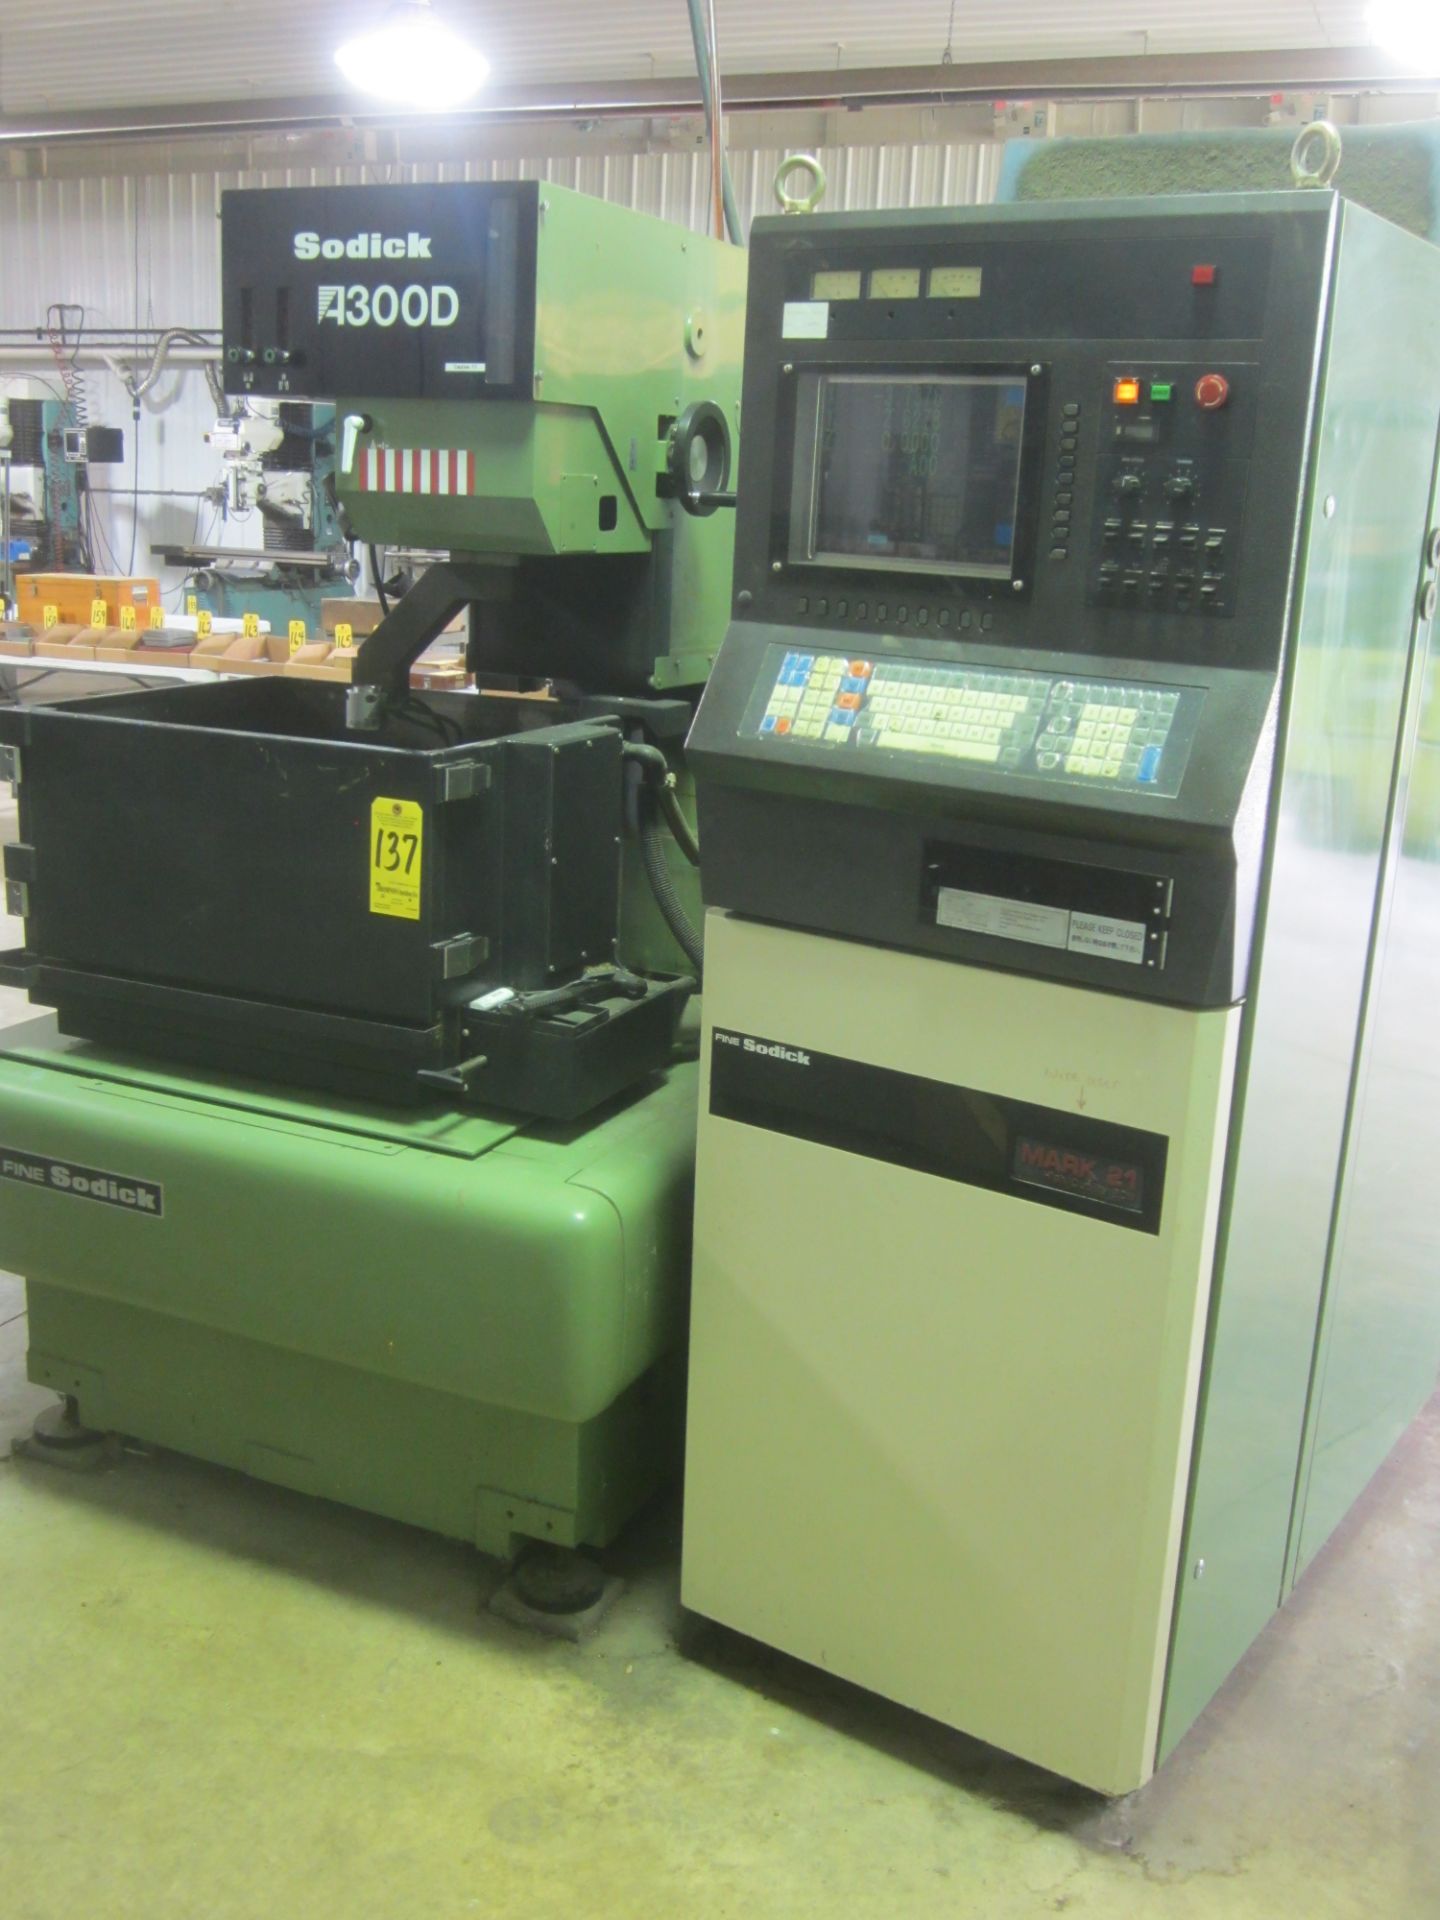 Sodick Model A300D CNC Wire EDM, s/n 1801, New 1997, 5-Axis, Mark 21 EDW CNC Control, Work Tank - Image 2 of 11